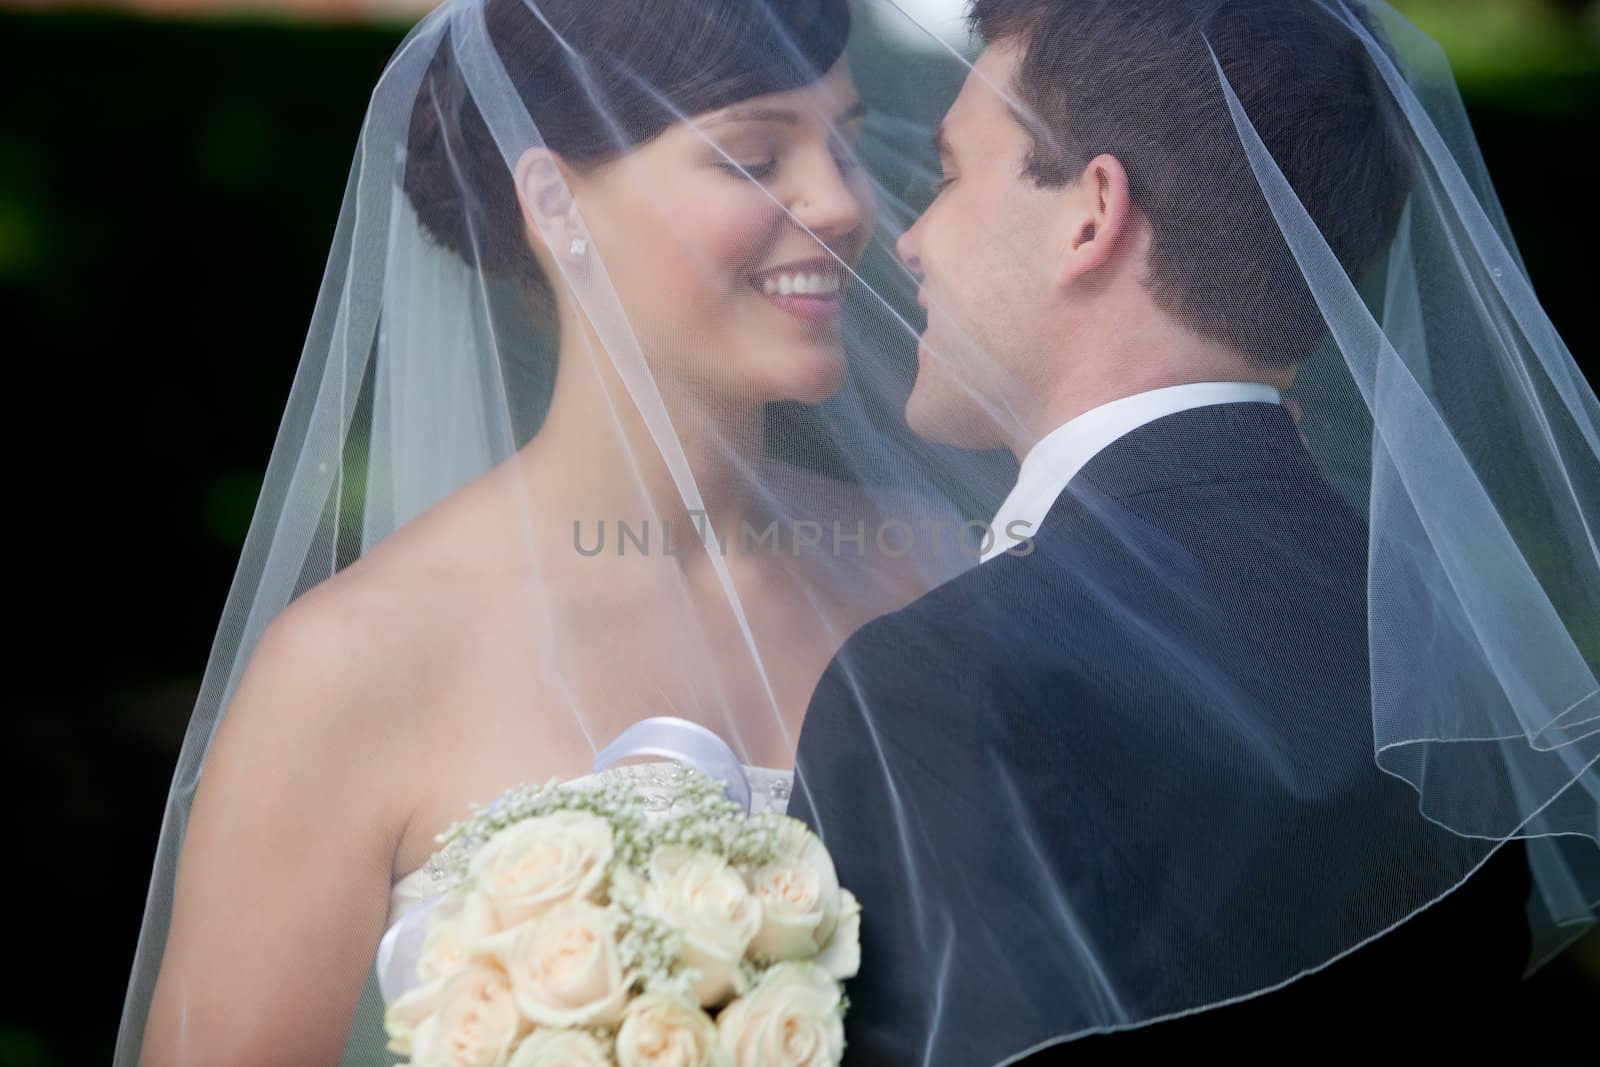 Bride And Groom Kissing Under Veil Holding Flower Bouquet In Hand.